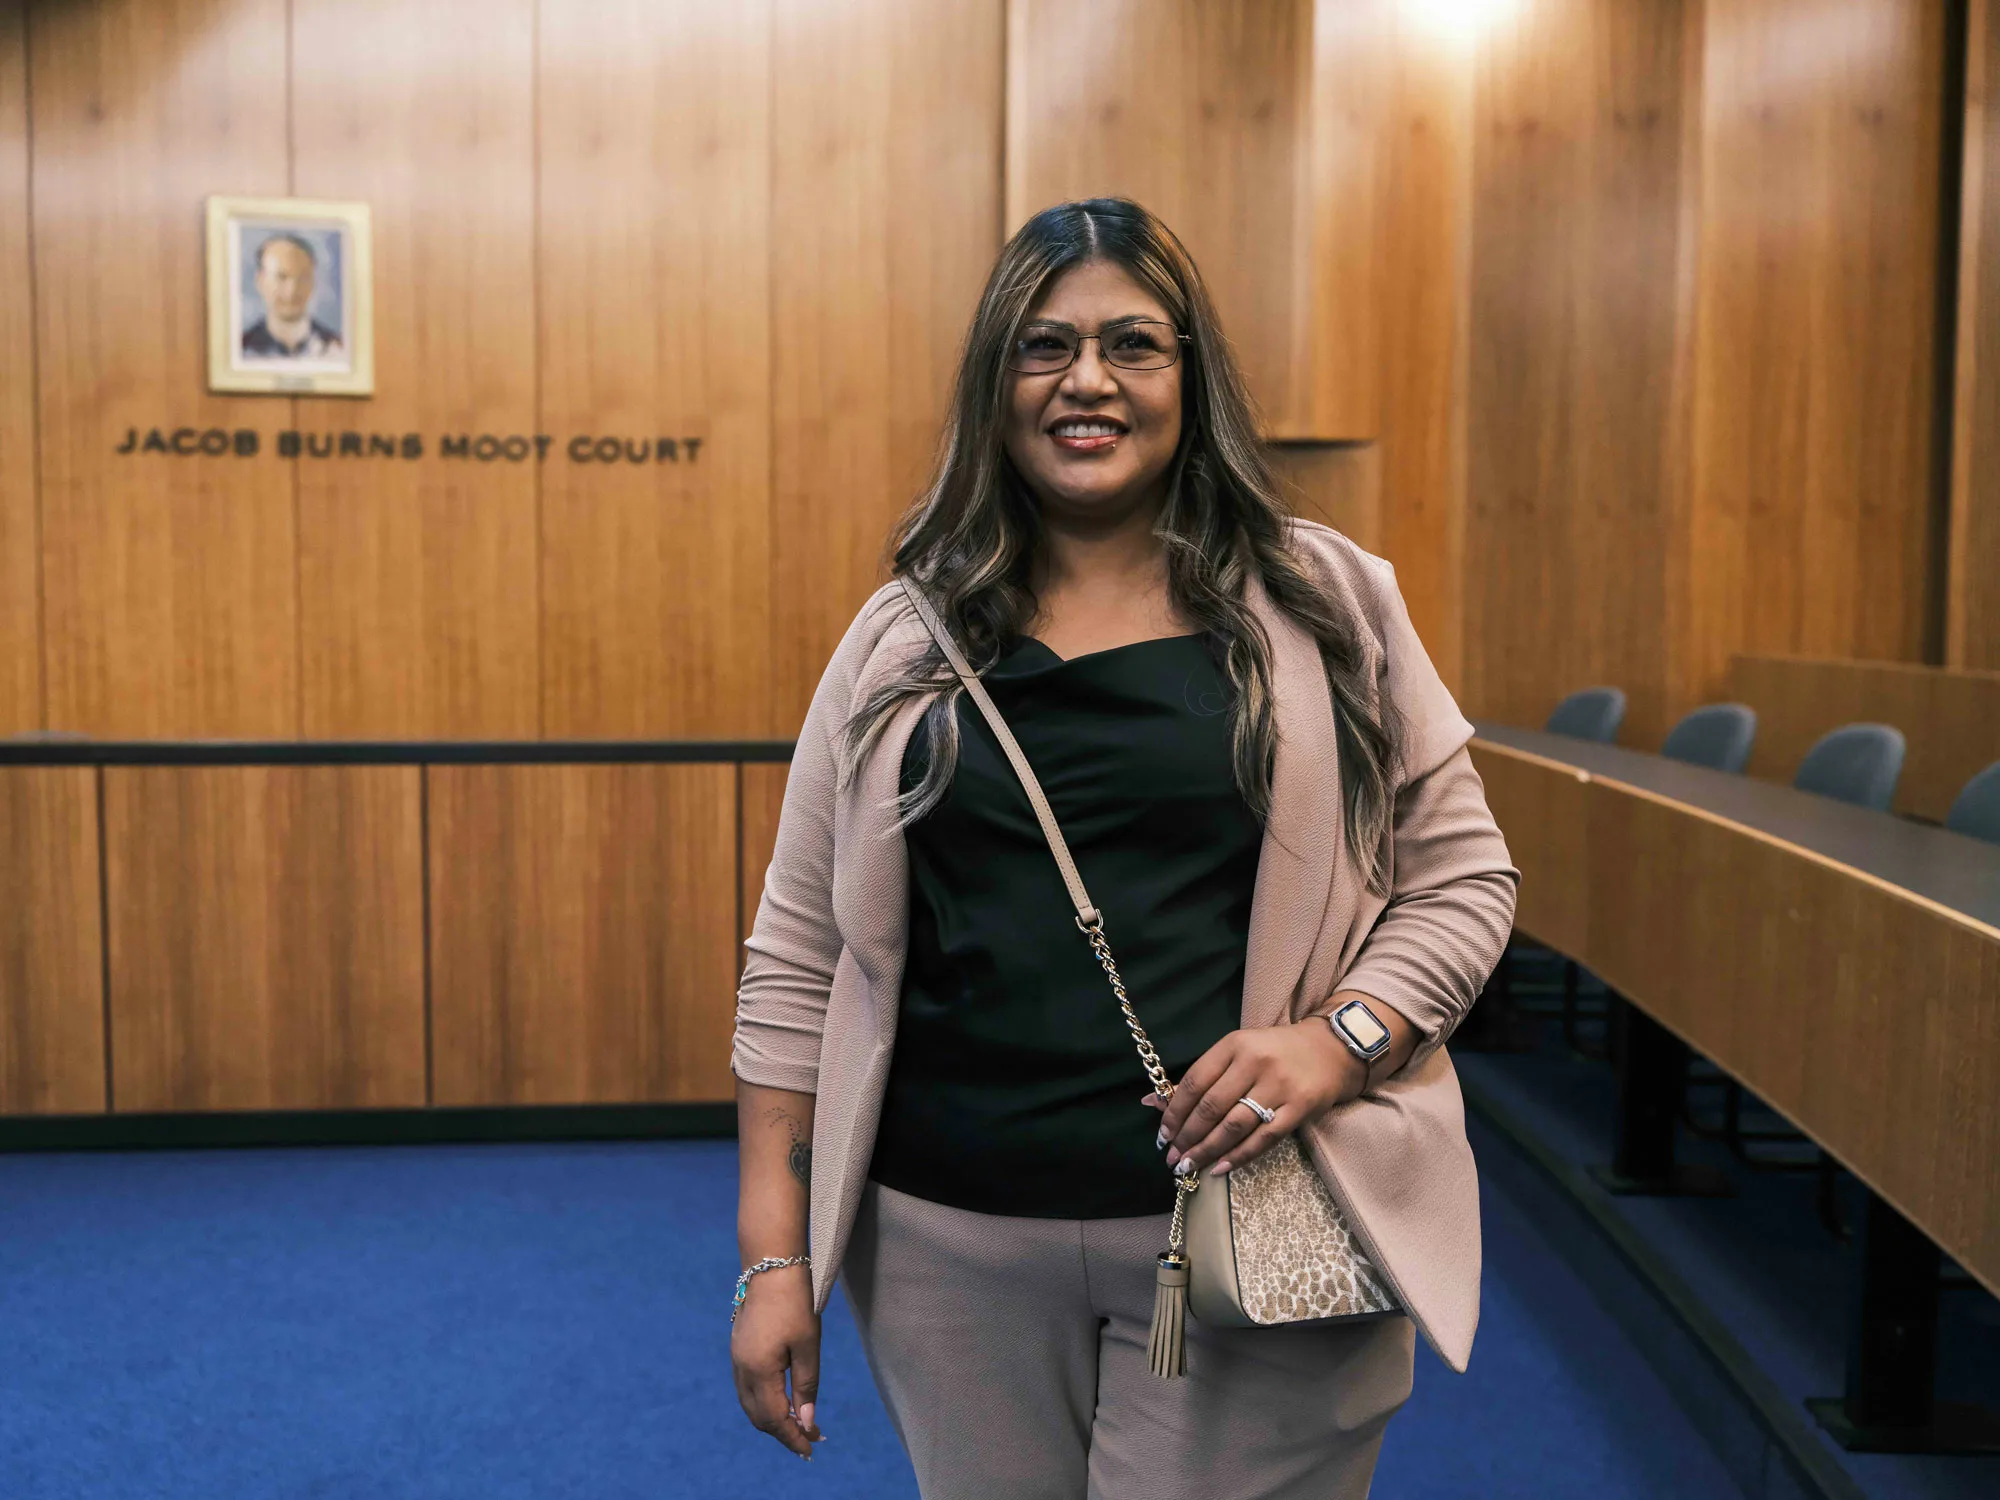 Rosa Jimenez exonerated on Aug. 7 after the Travis County District Attorney moved to dismiss a 2003 murder charge against her. (Images: Elijah Craig II/Innocence Project)